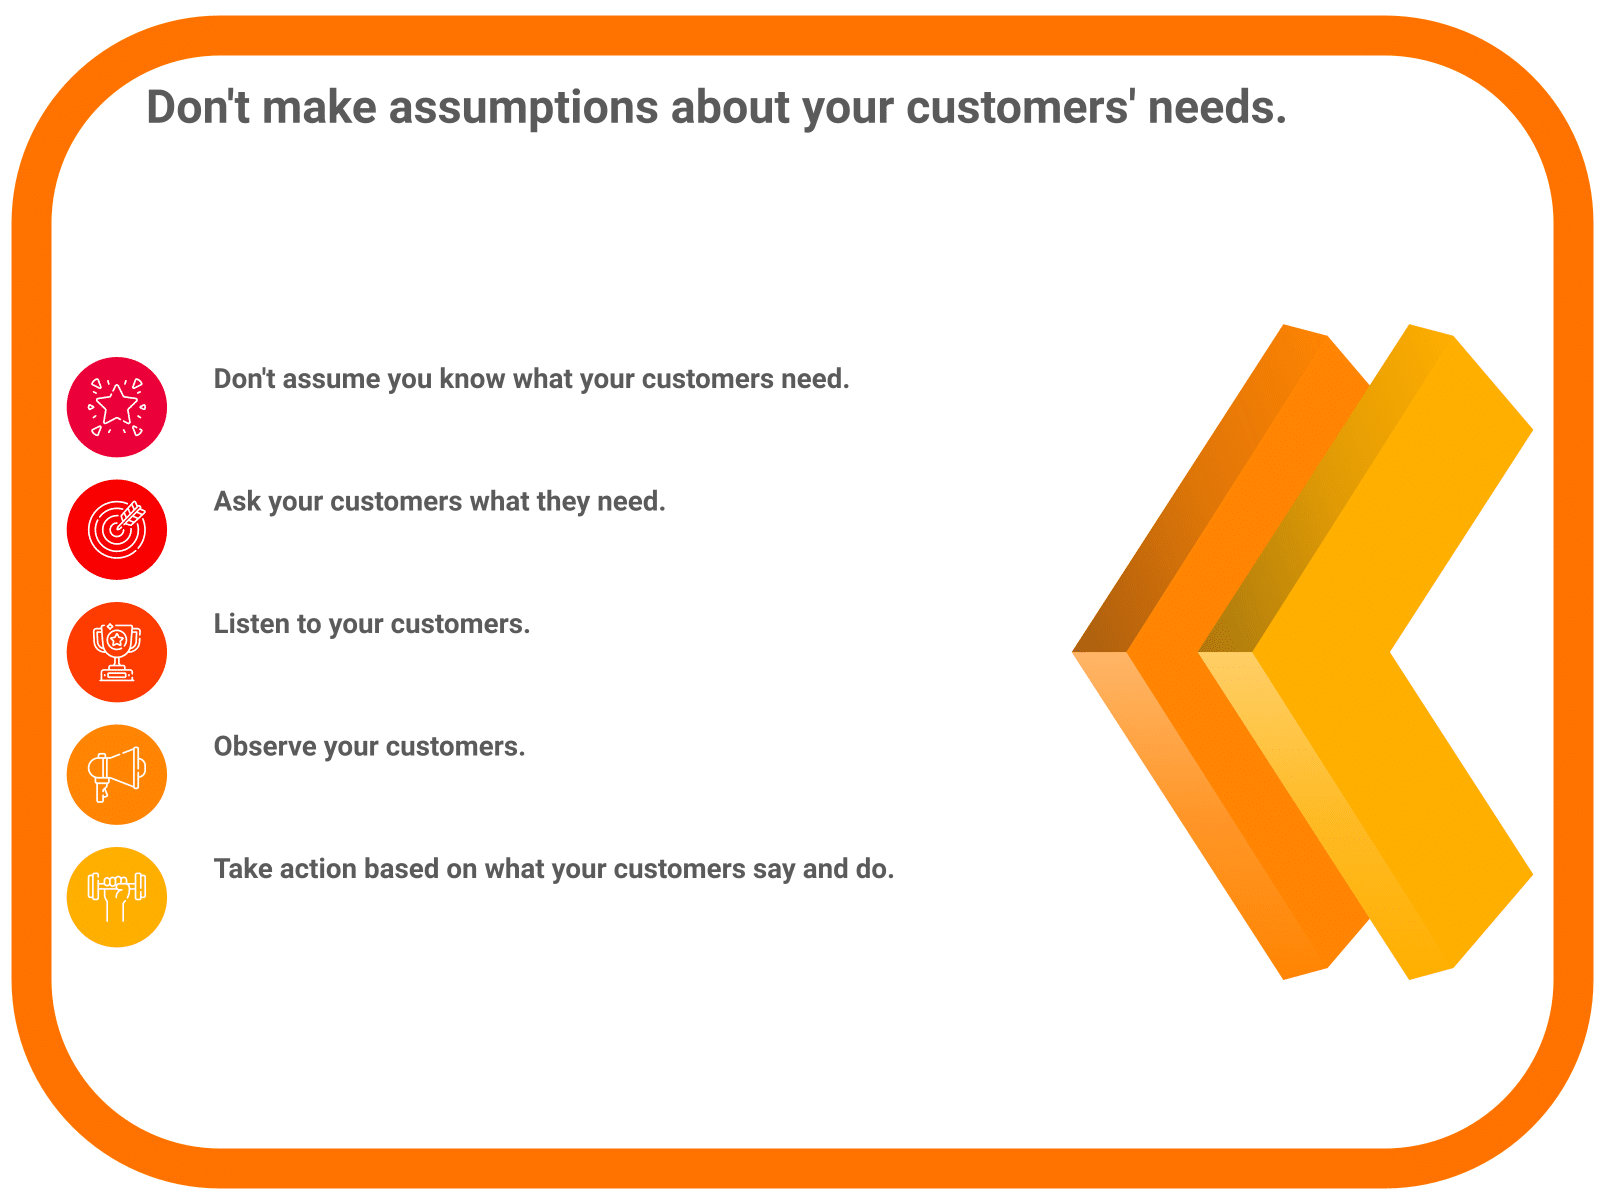 Don’t make assumptions about your customers’ needs.